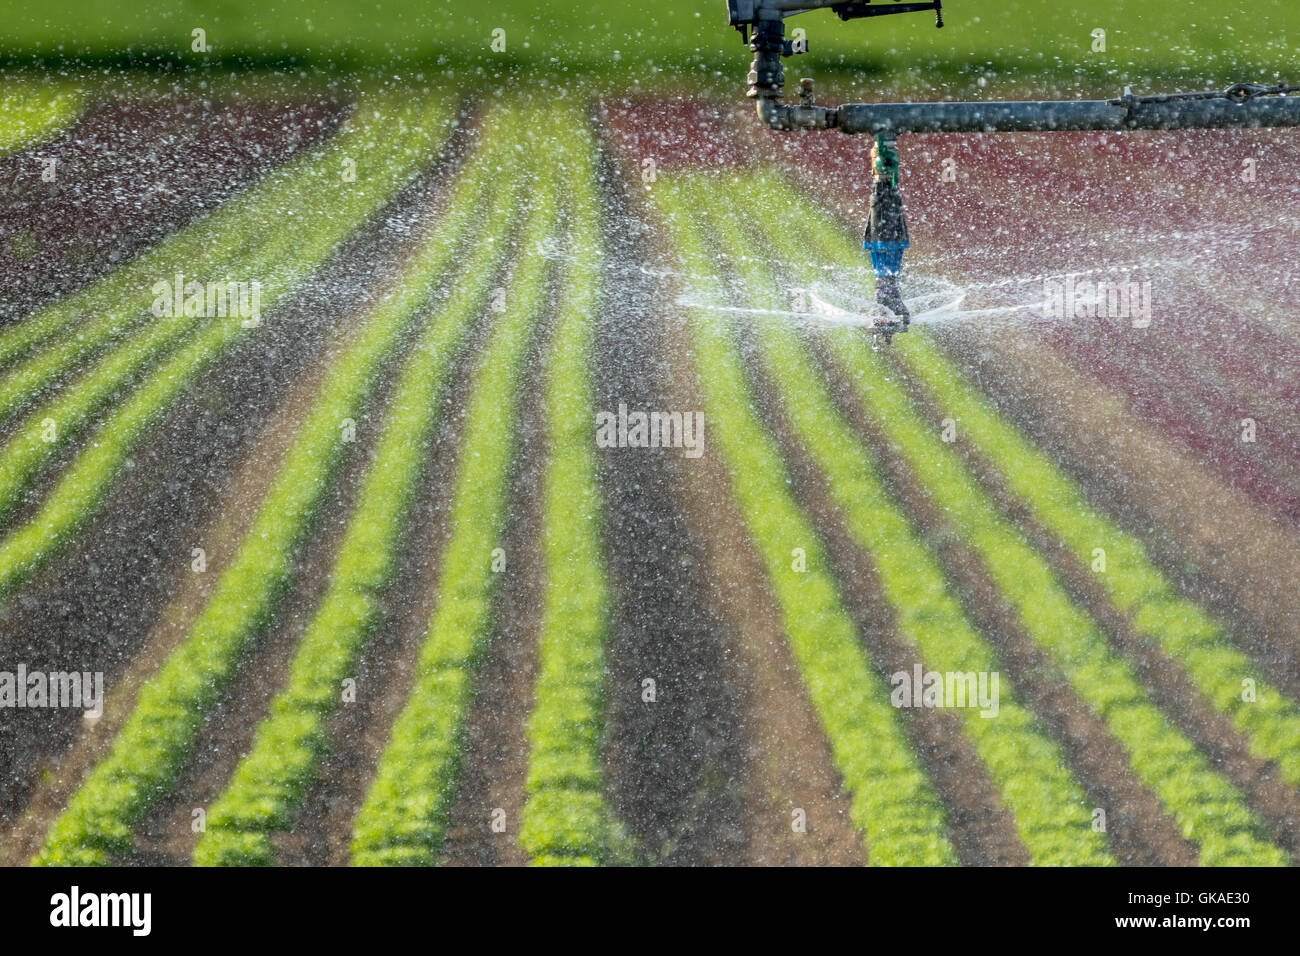 modern agriculture with sprinklers above salad Stock Photo